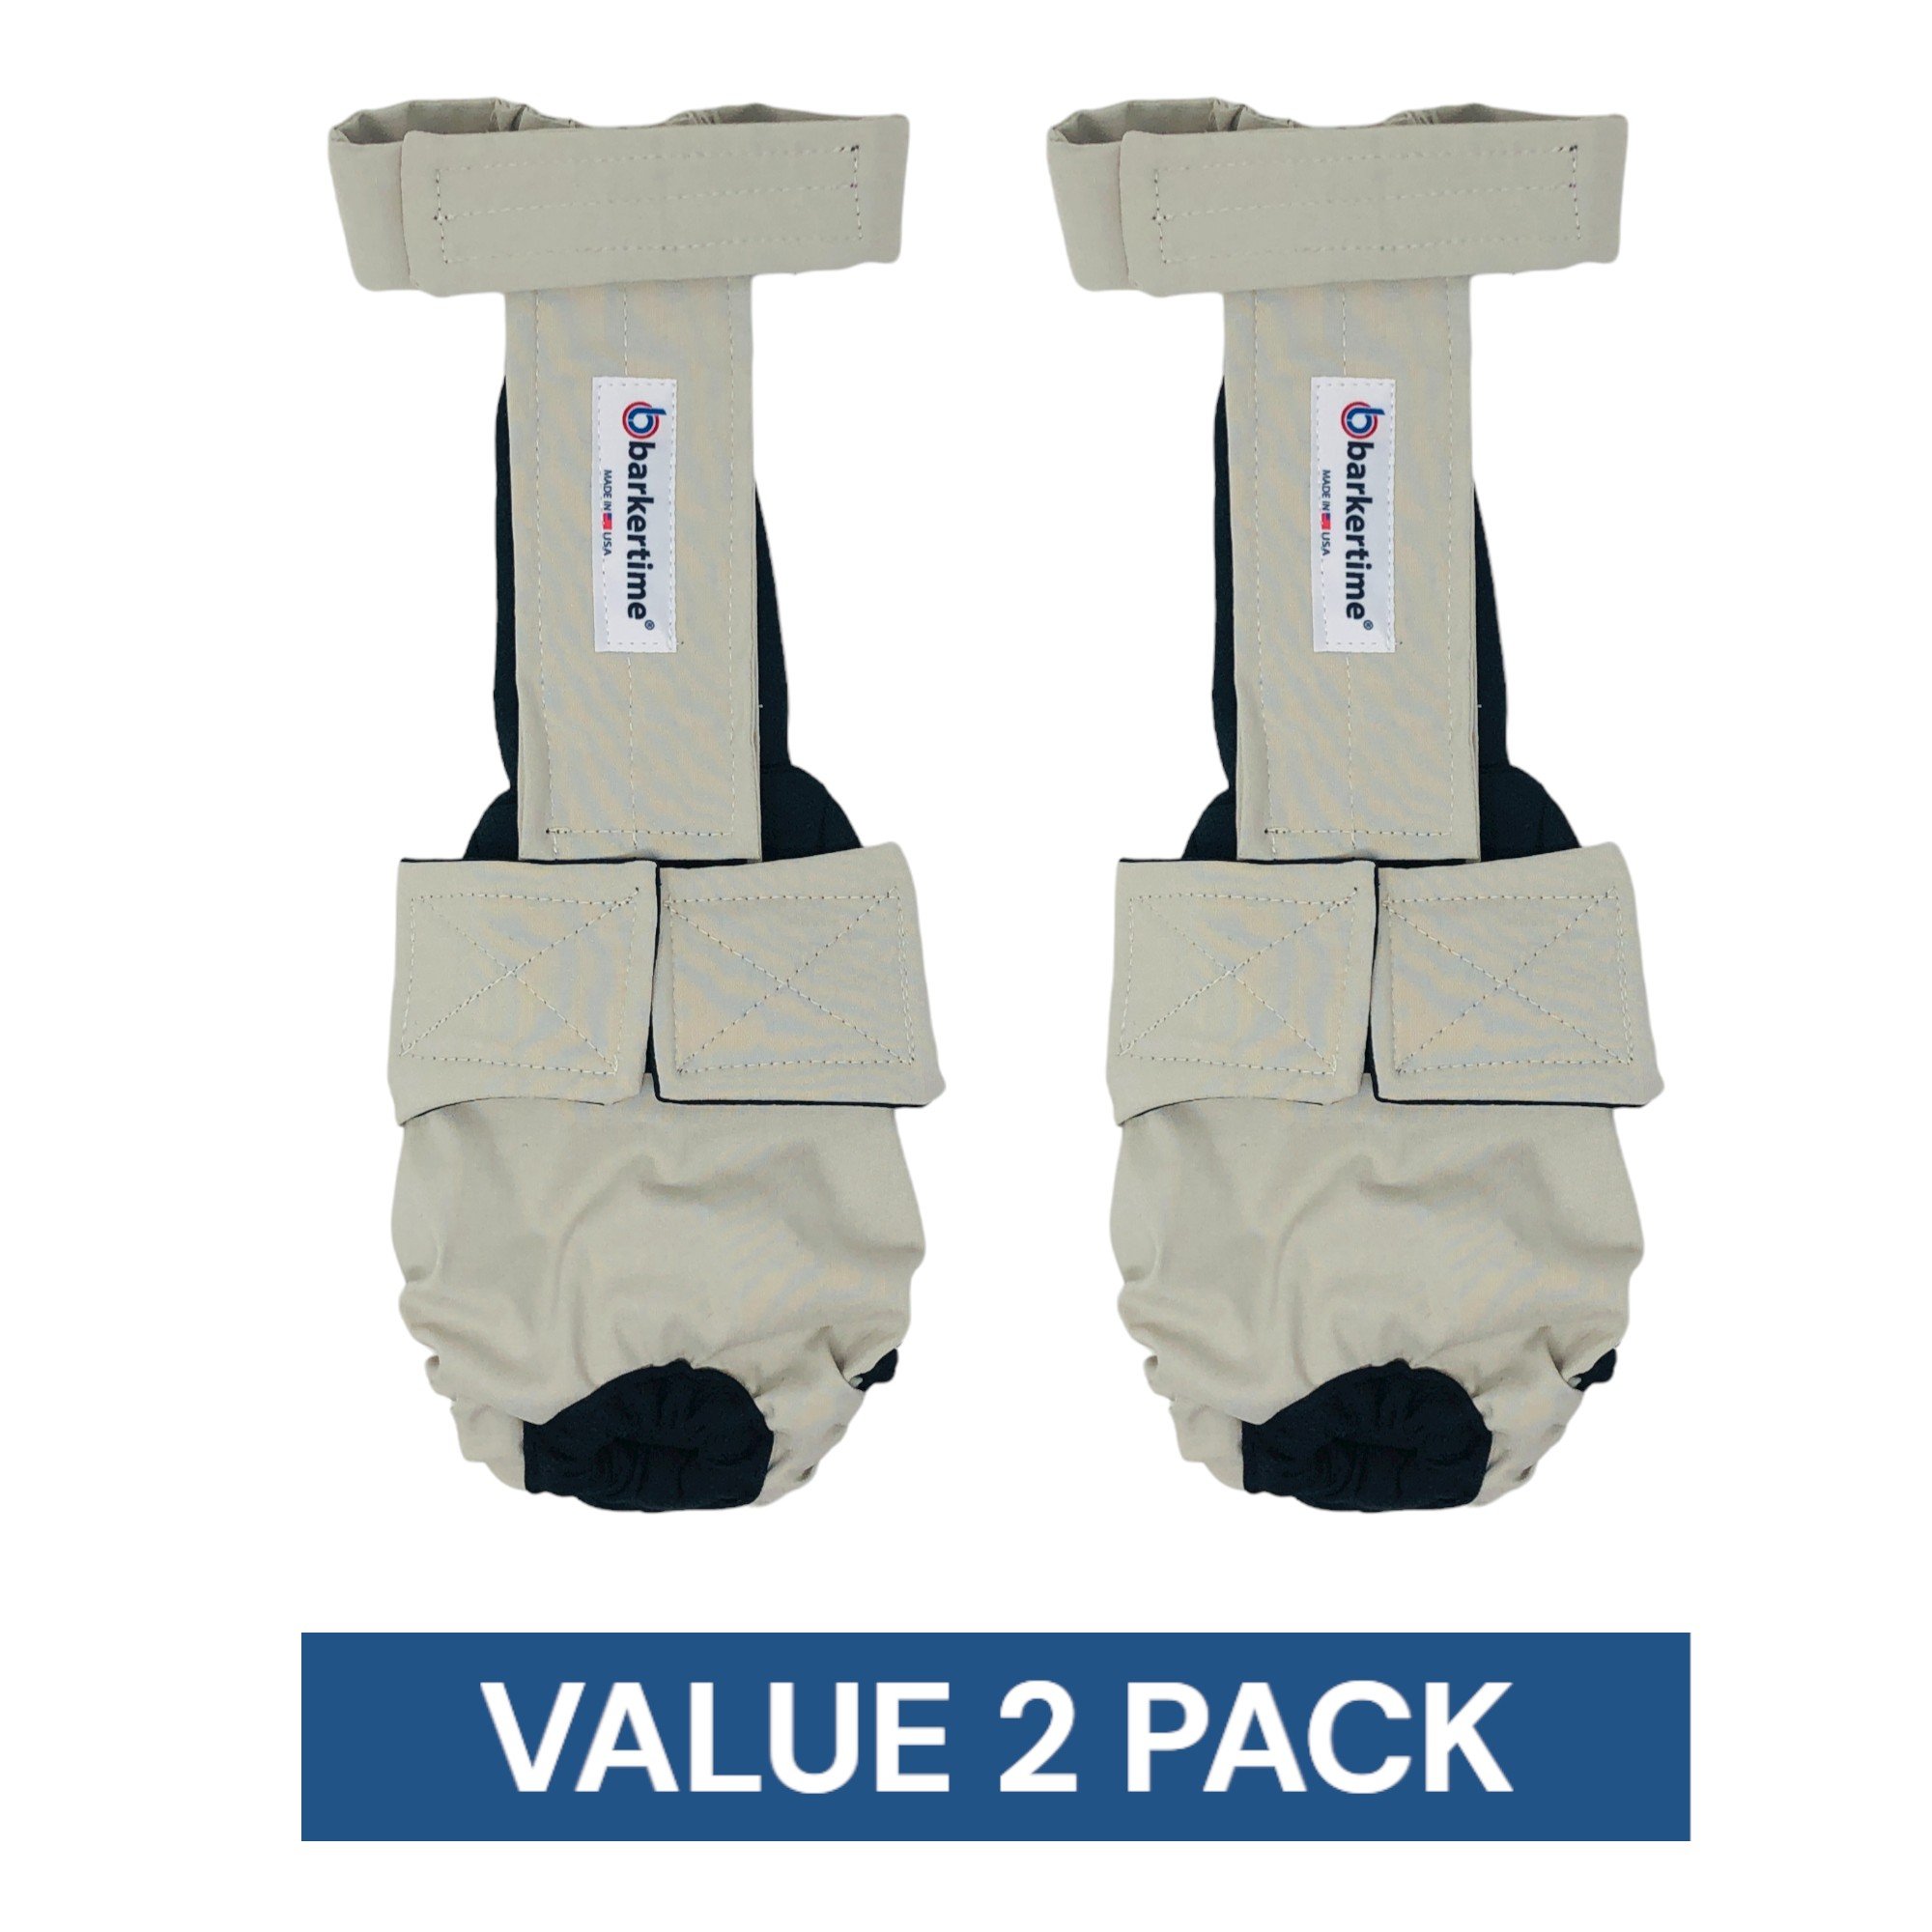 Value 2-pack: Frosty Cream Dog Diaper Overall